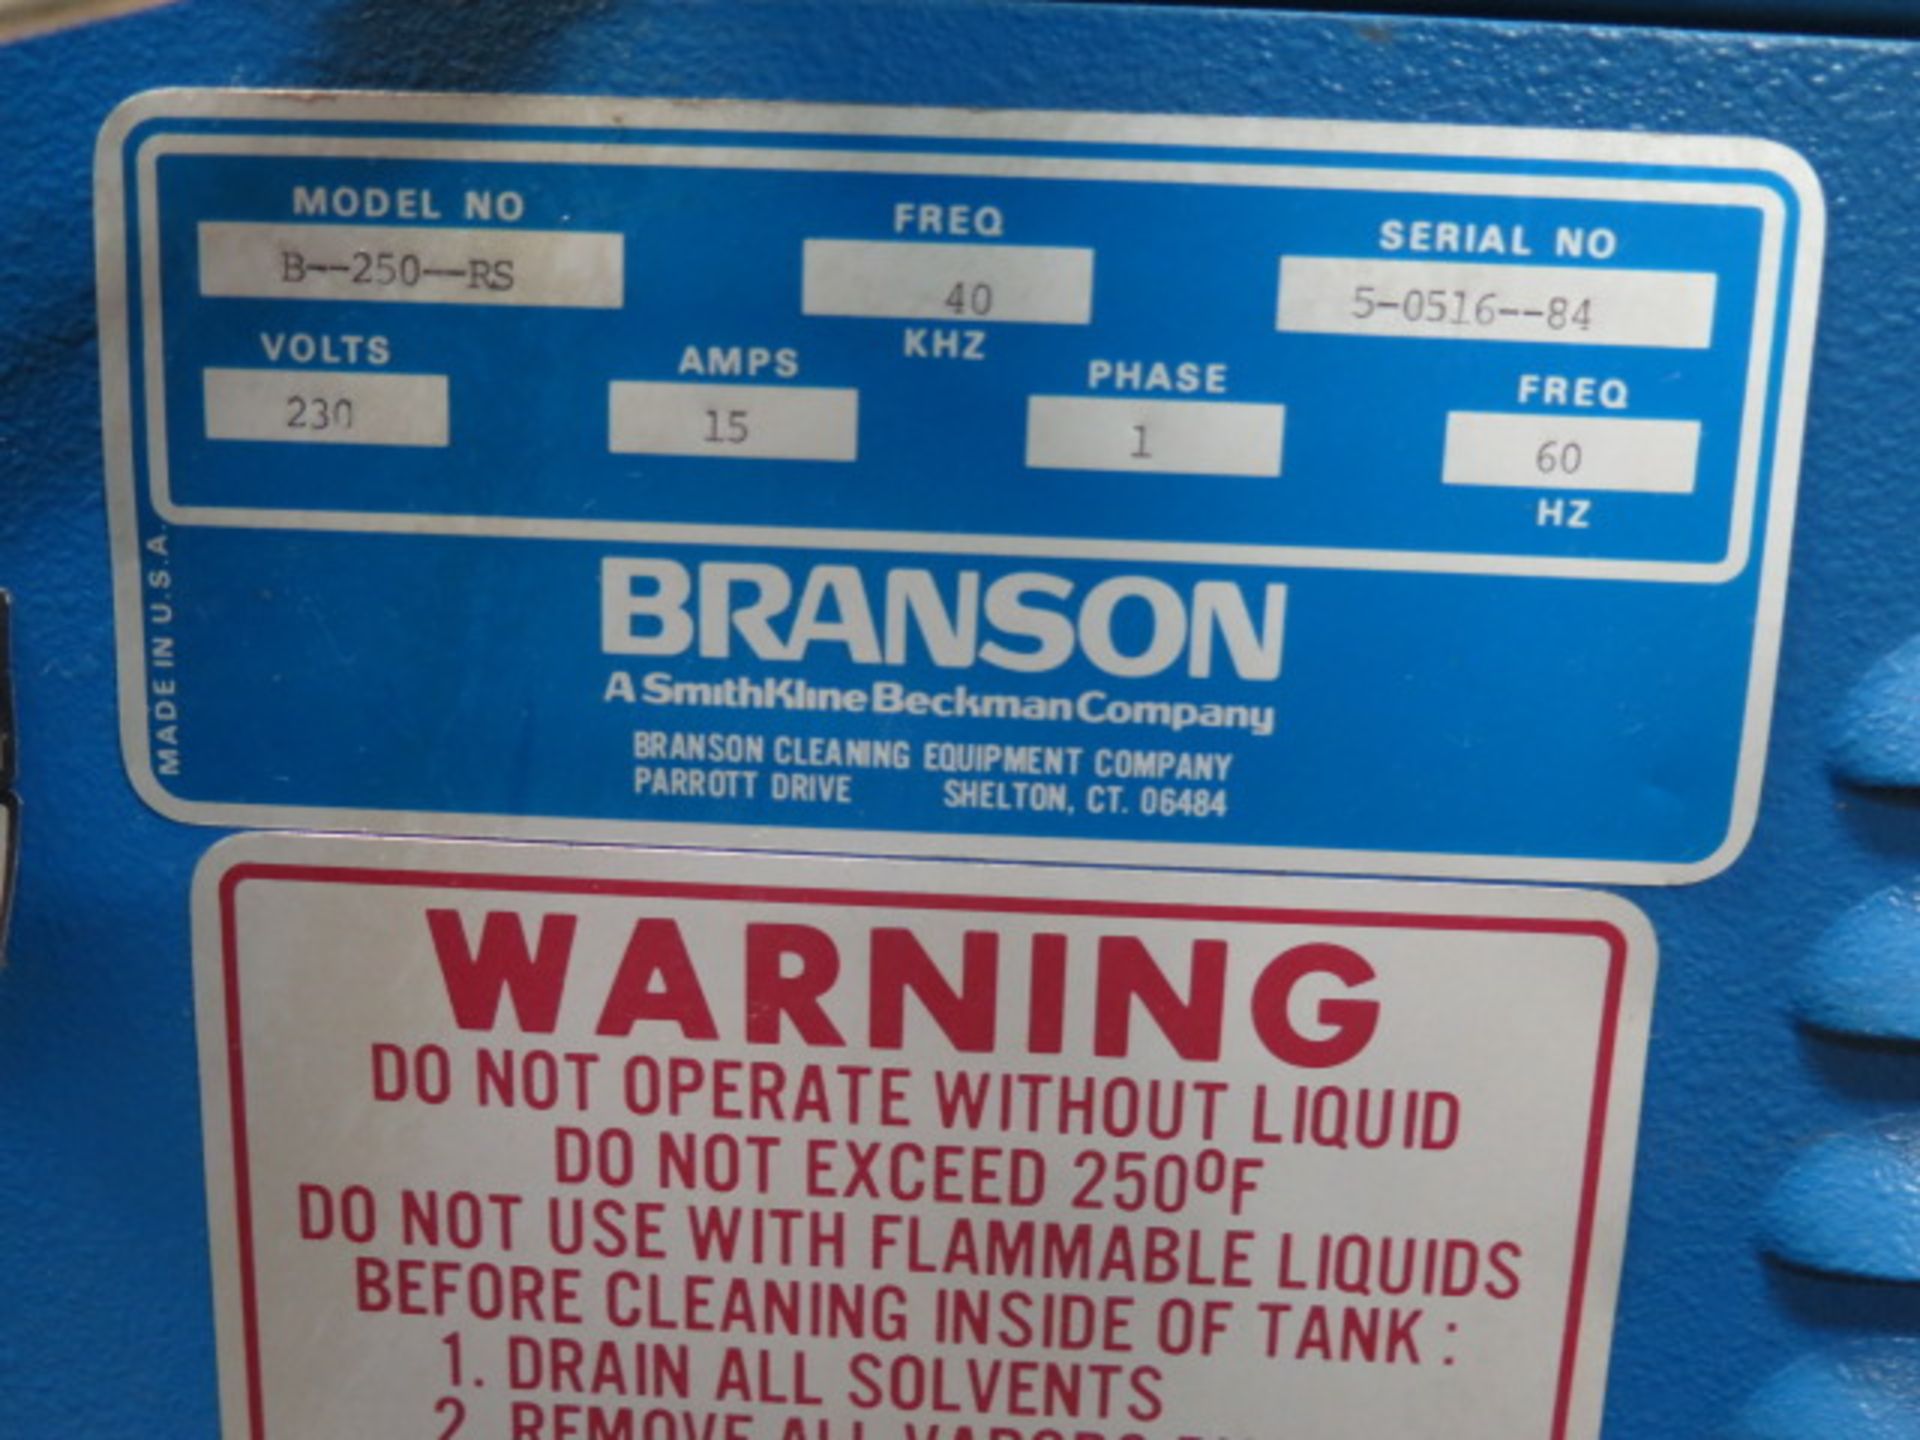 Branson B-250-RS Ultrasonic Cleaning System s/n 5-0516-84 (SOLD AS-IS - NO WARRANTY) - Image 6 of 6